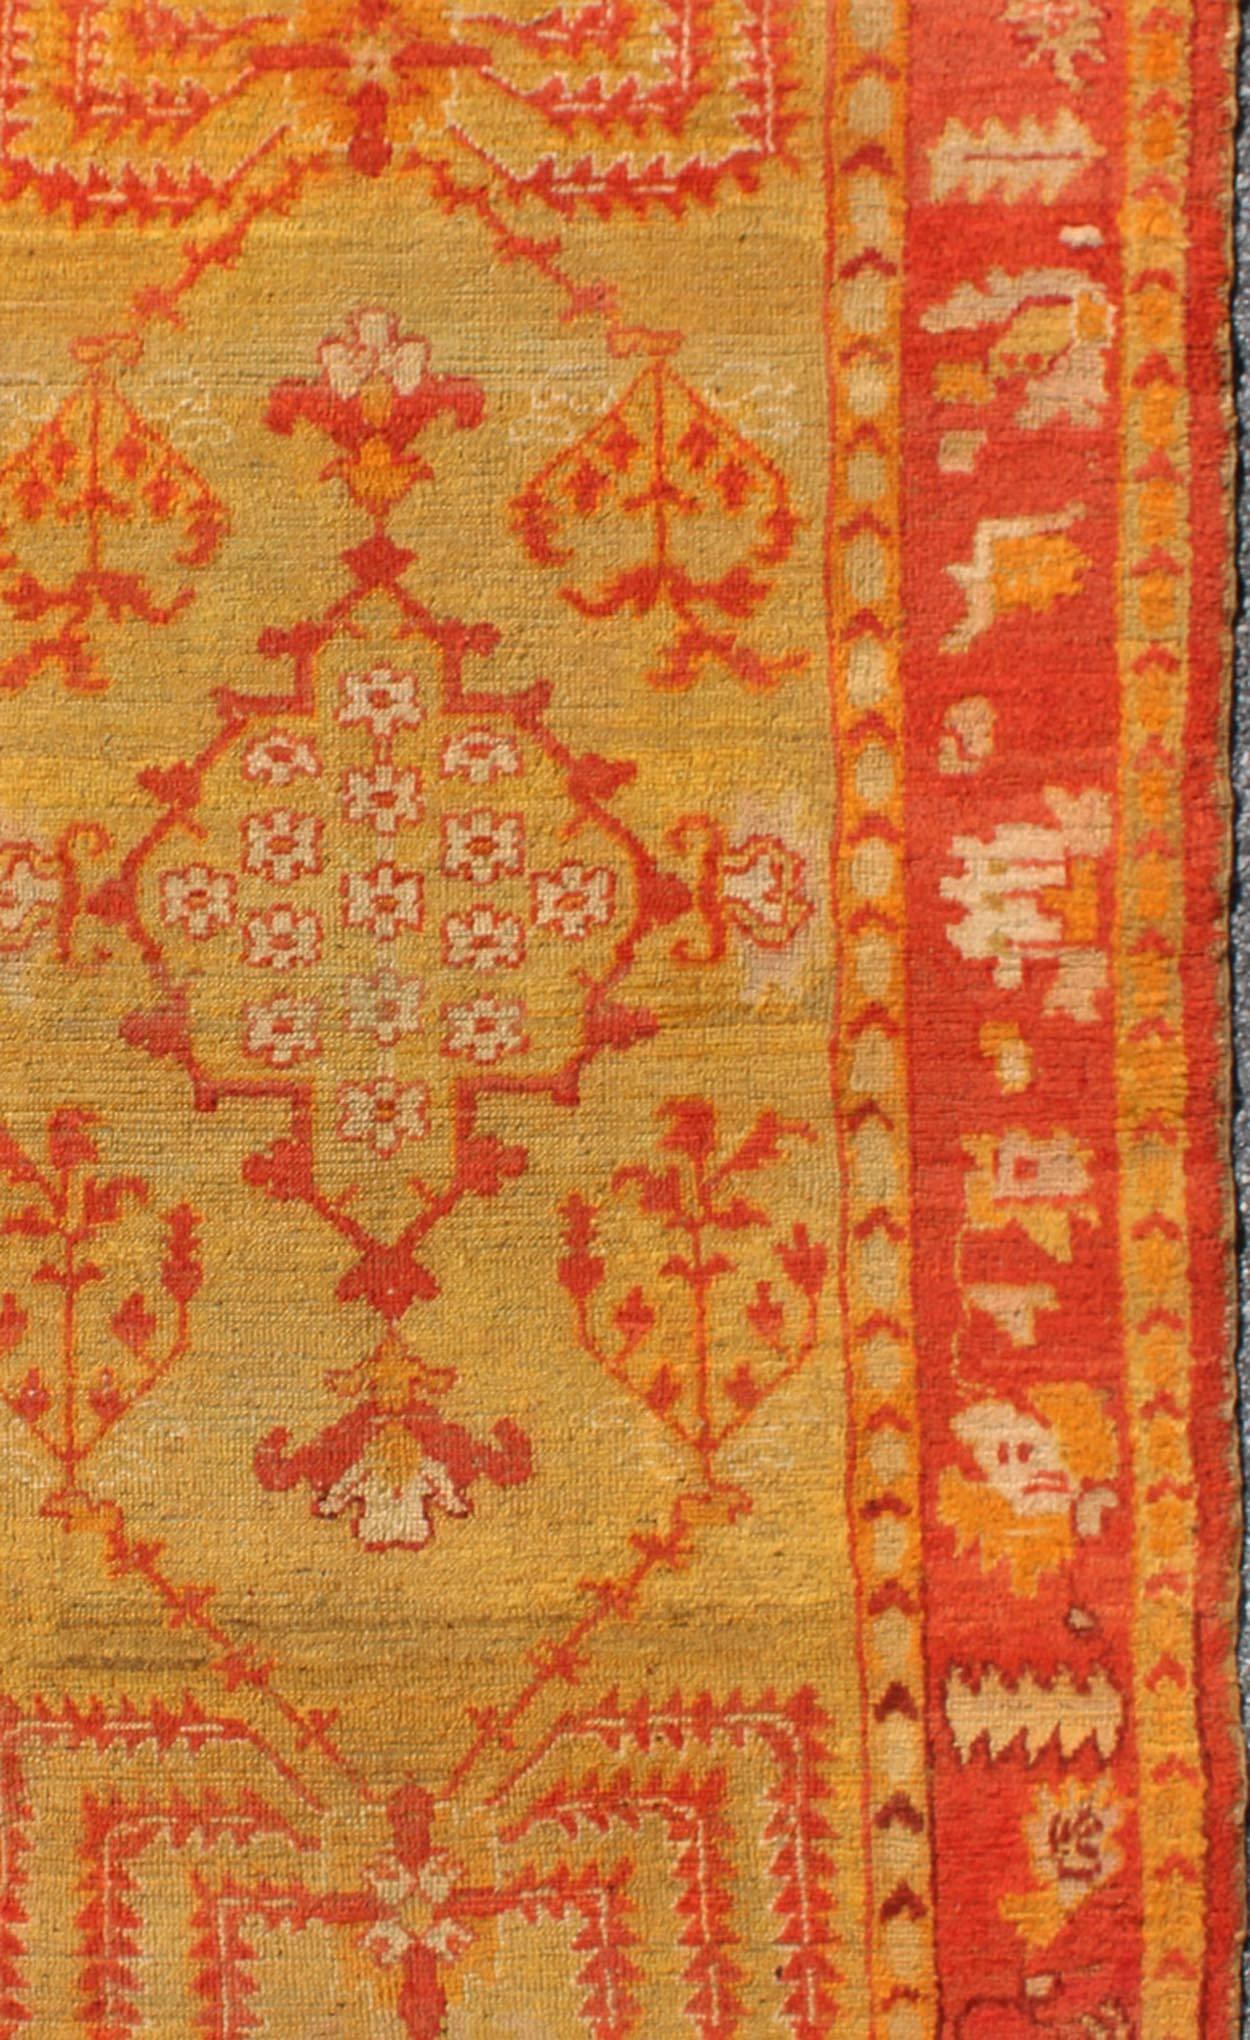 Hand-Knotted Antique Turkish Oushak Rug With Willow Trees Design in Orange Red & Yellow-Green For Sale